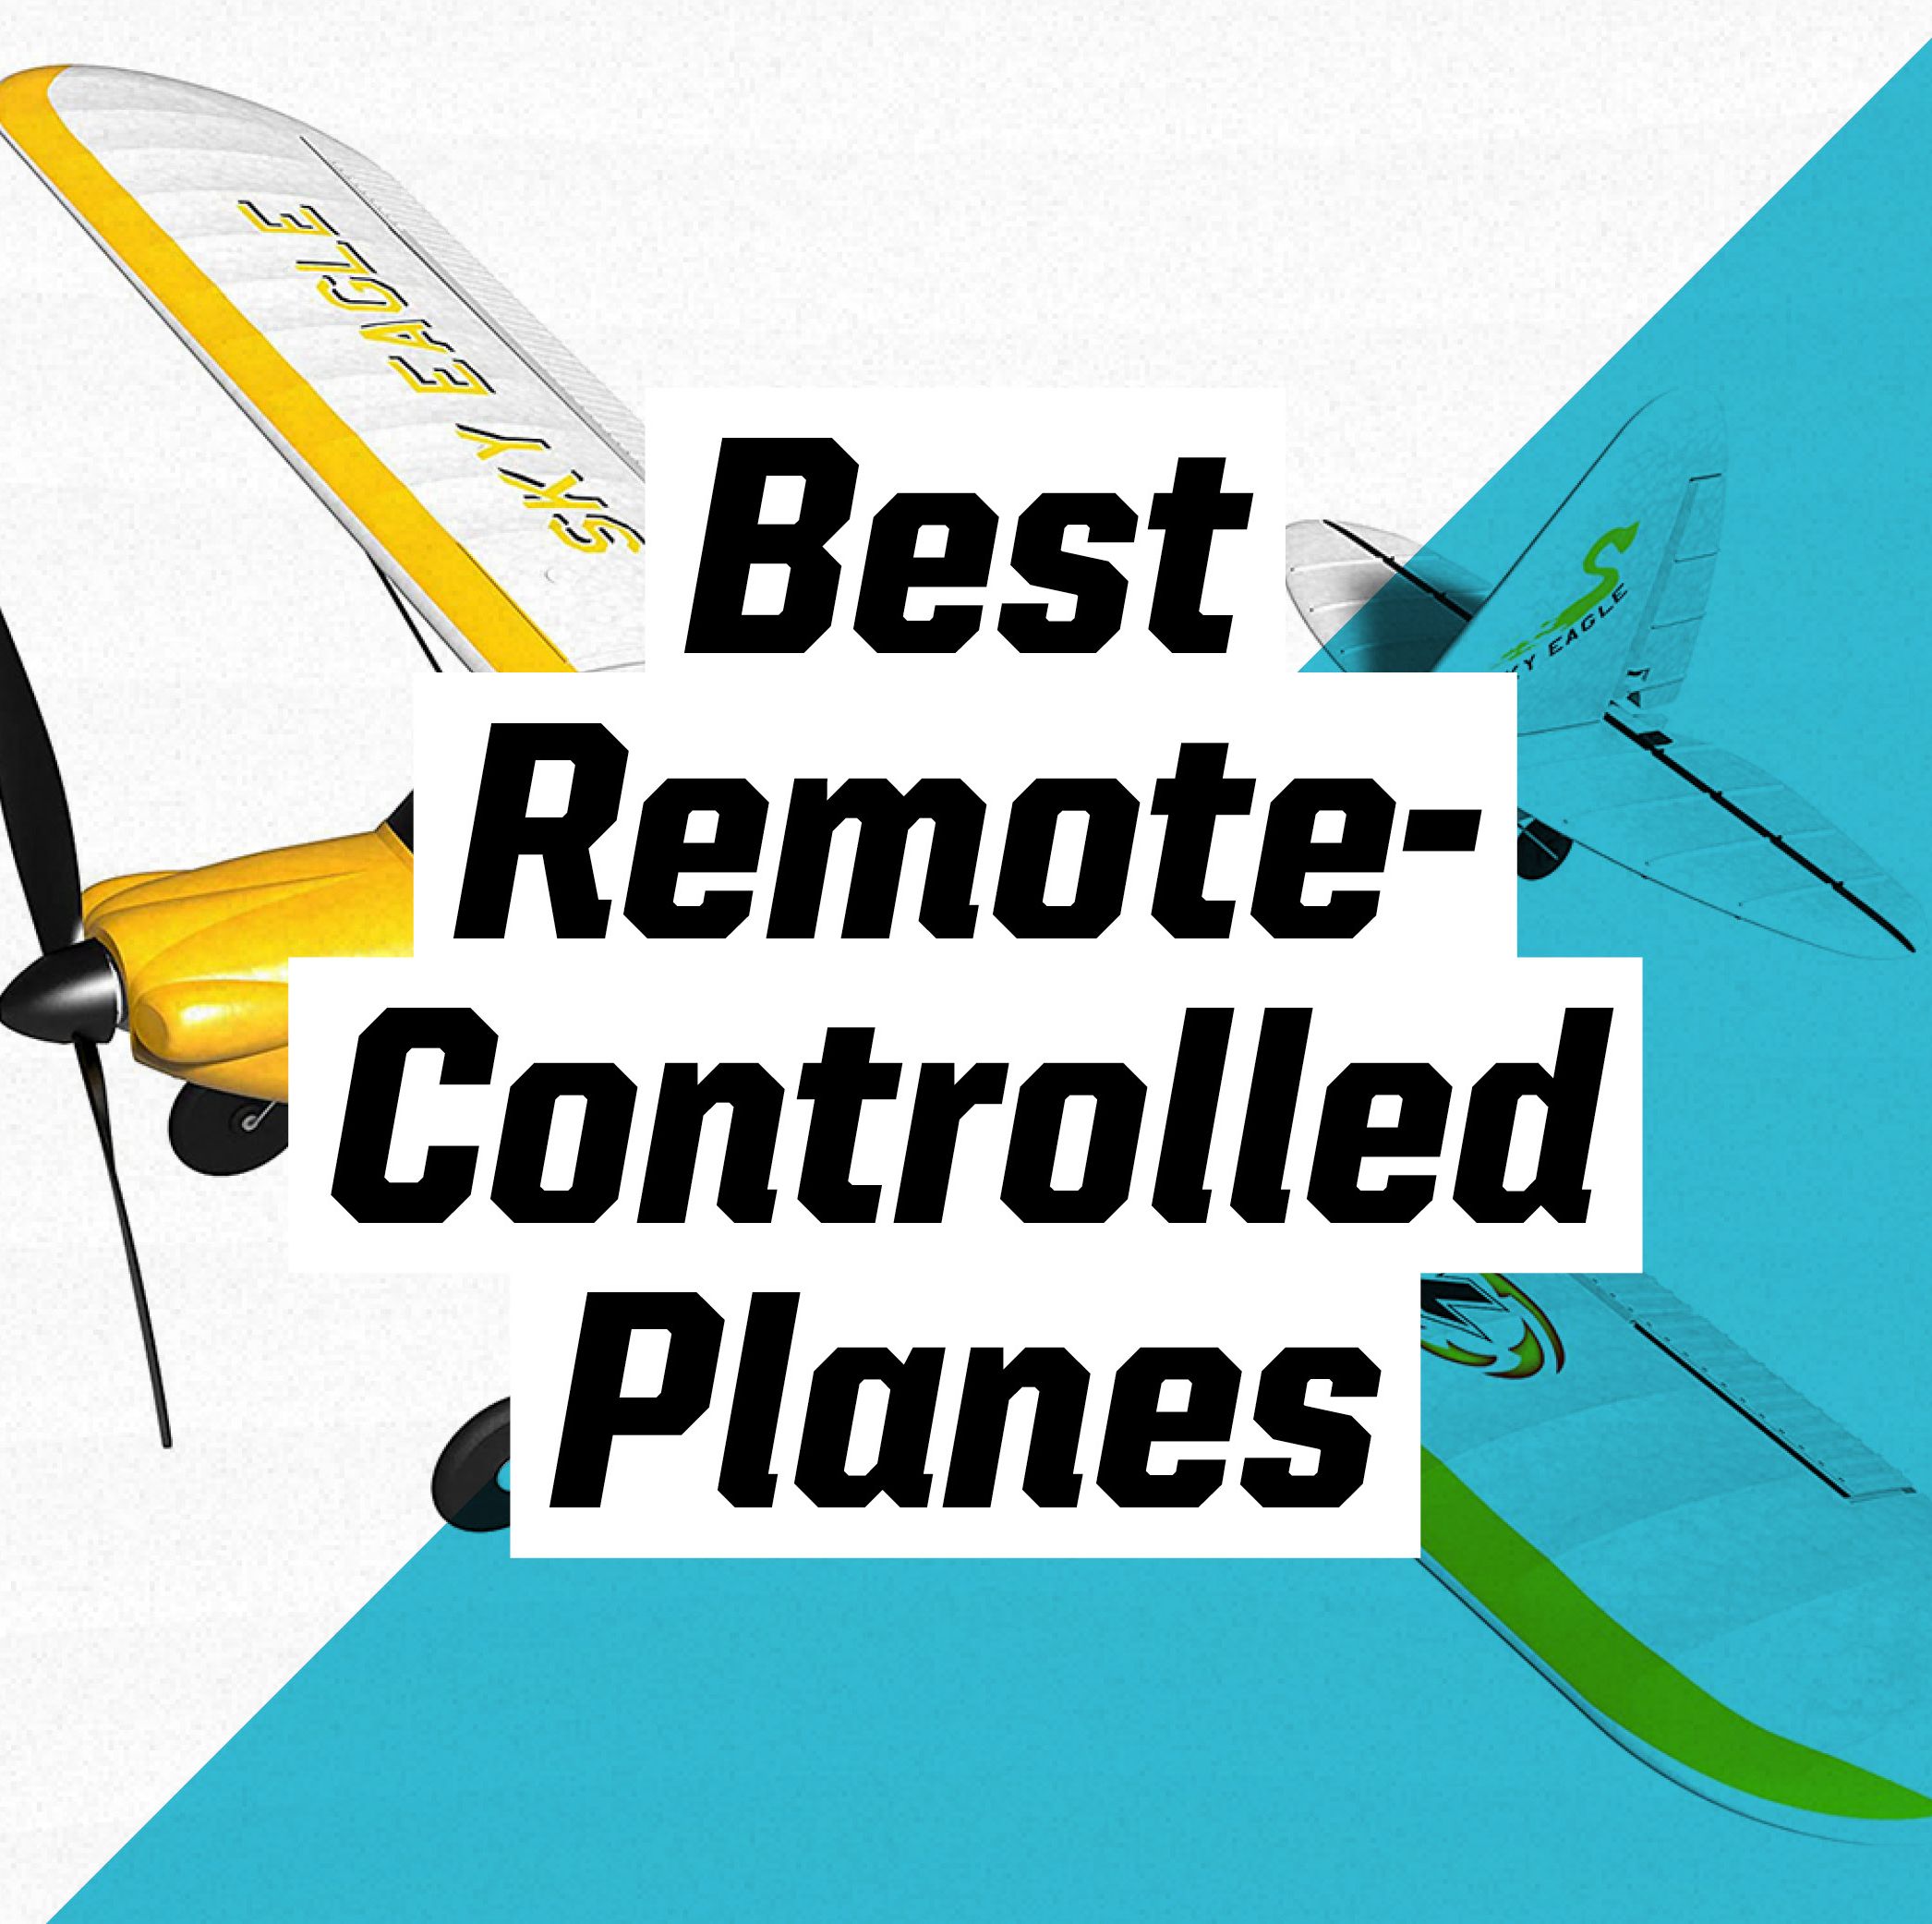 These Are the Best Remote-Controlled Planes